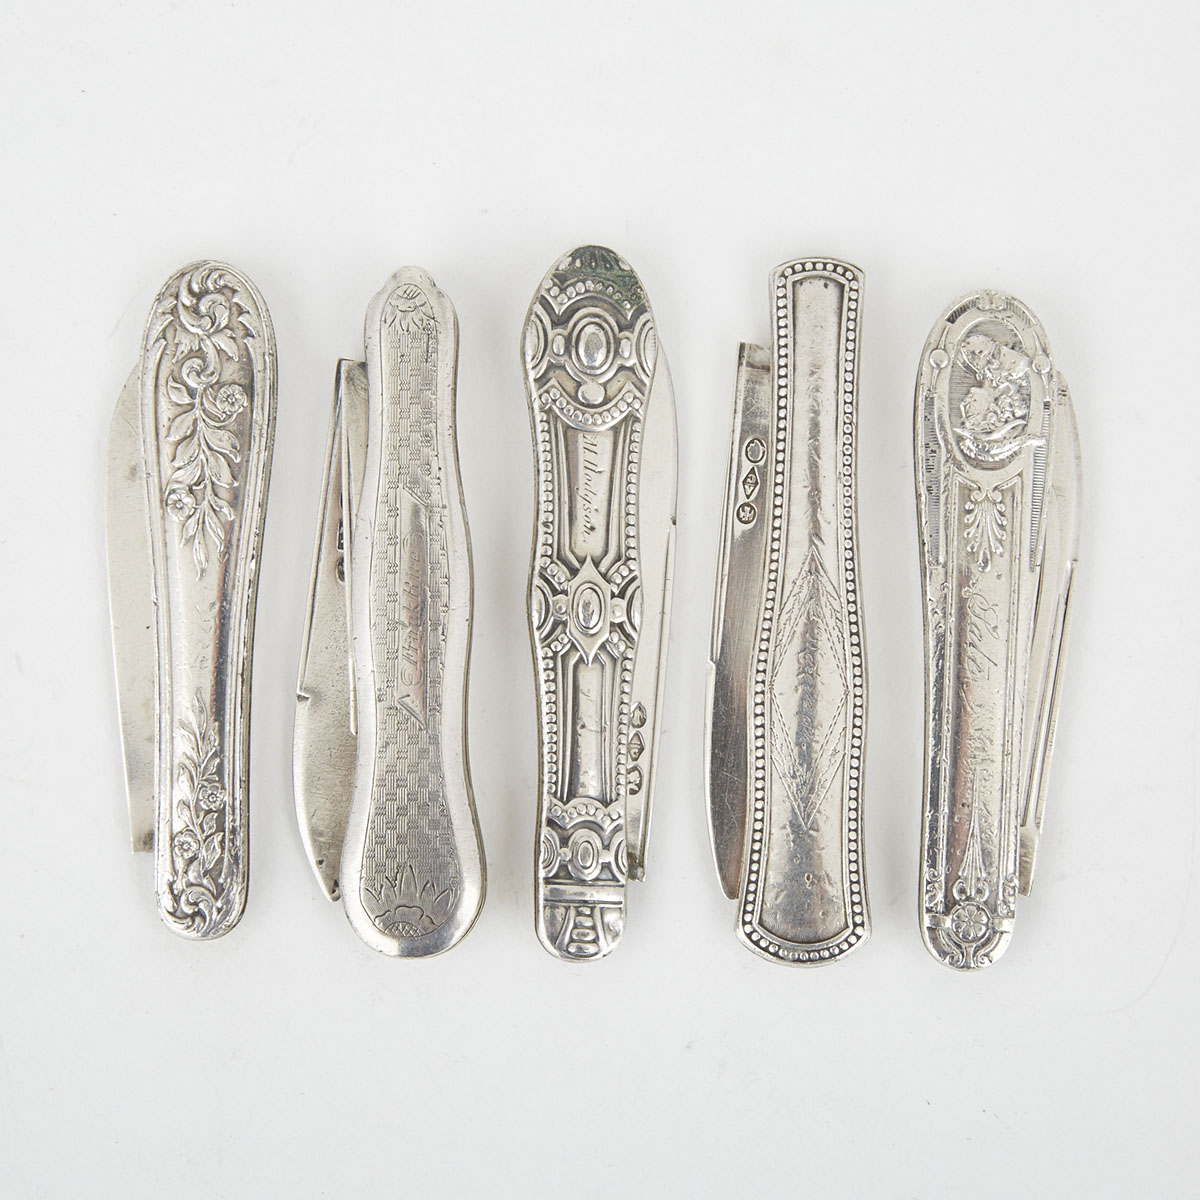 Five American Silver Pocket Knives, late 19th century